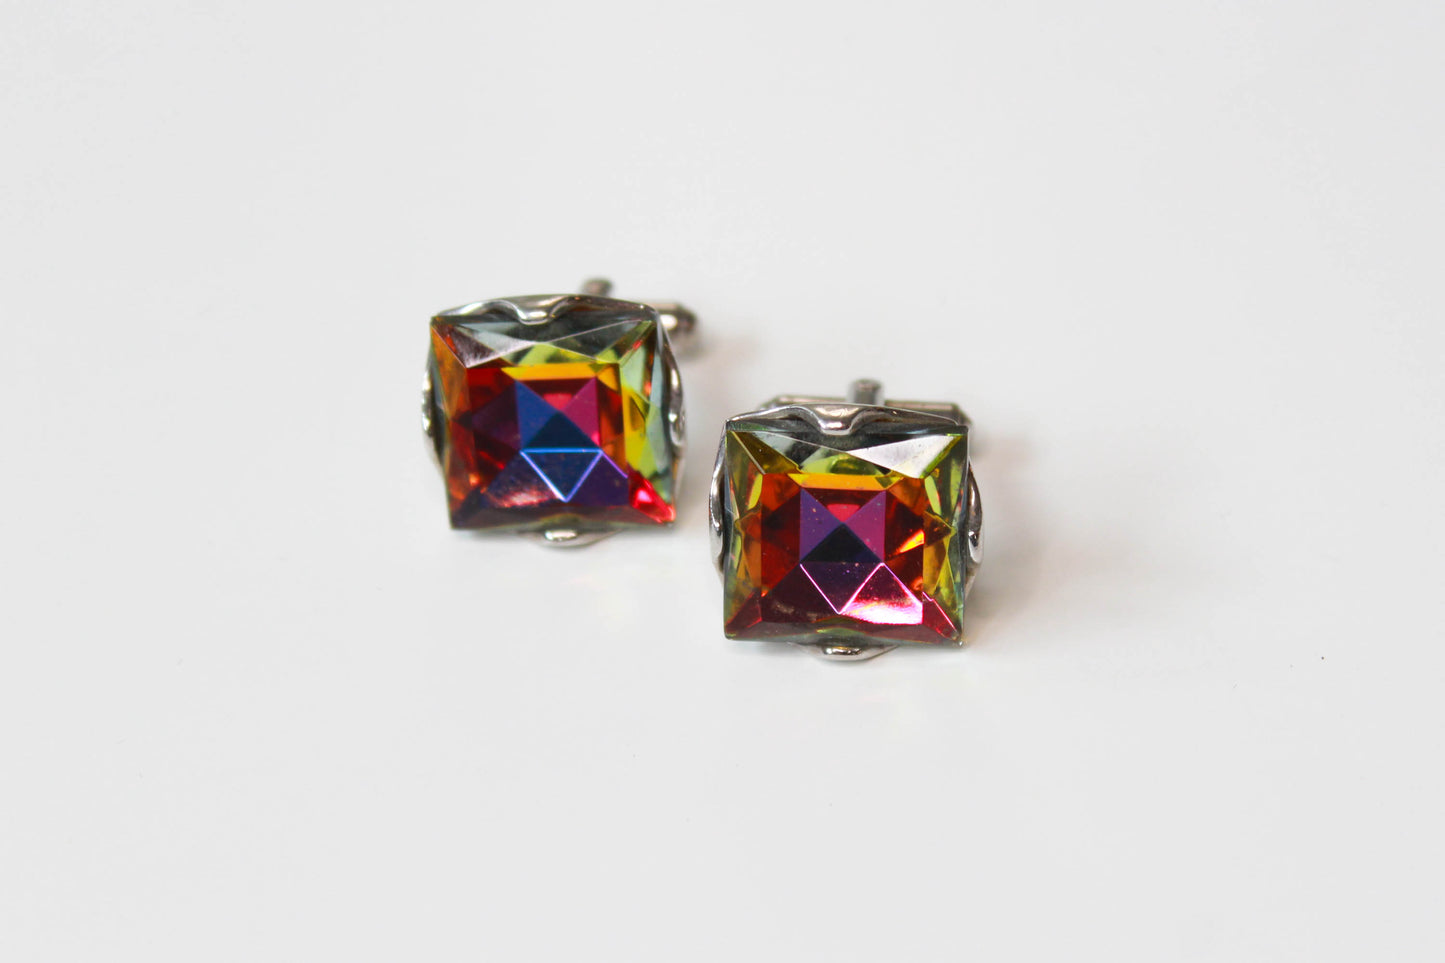 1970s vitrail watermelon glass crystal swank cufflinks, square shape multi coloured pink green orange, vintage gift for him